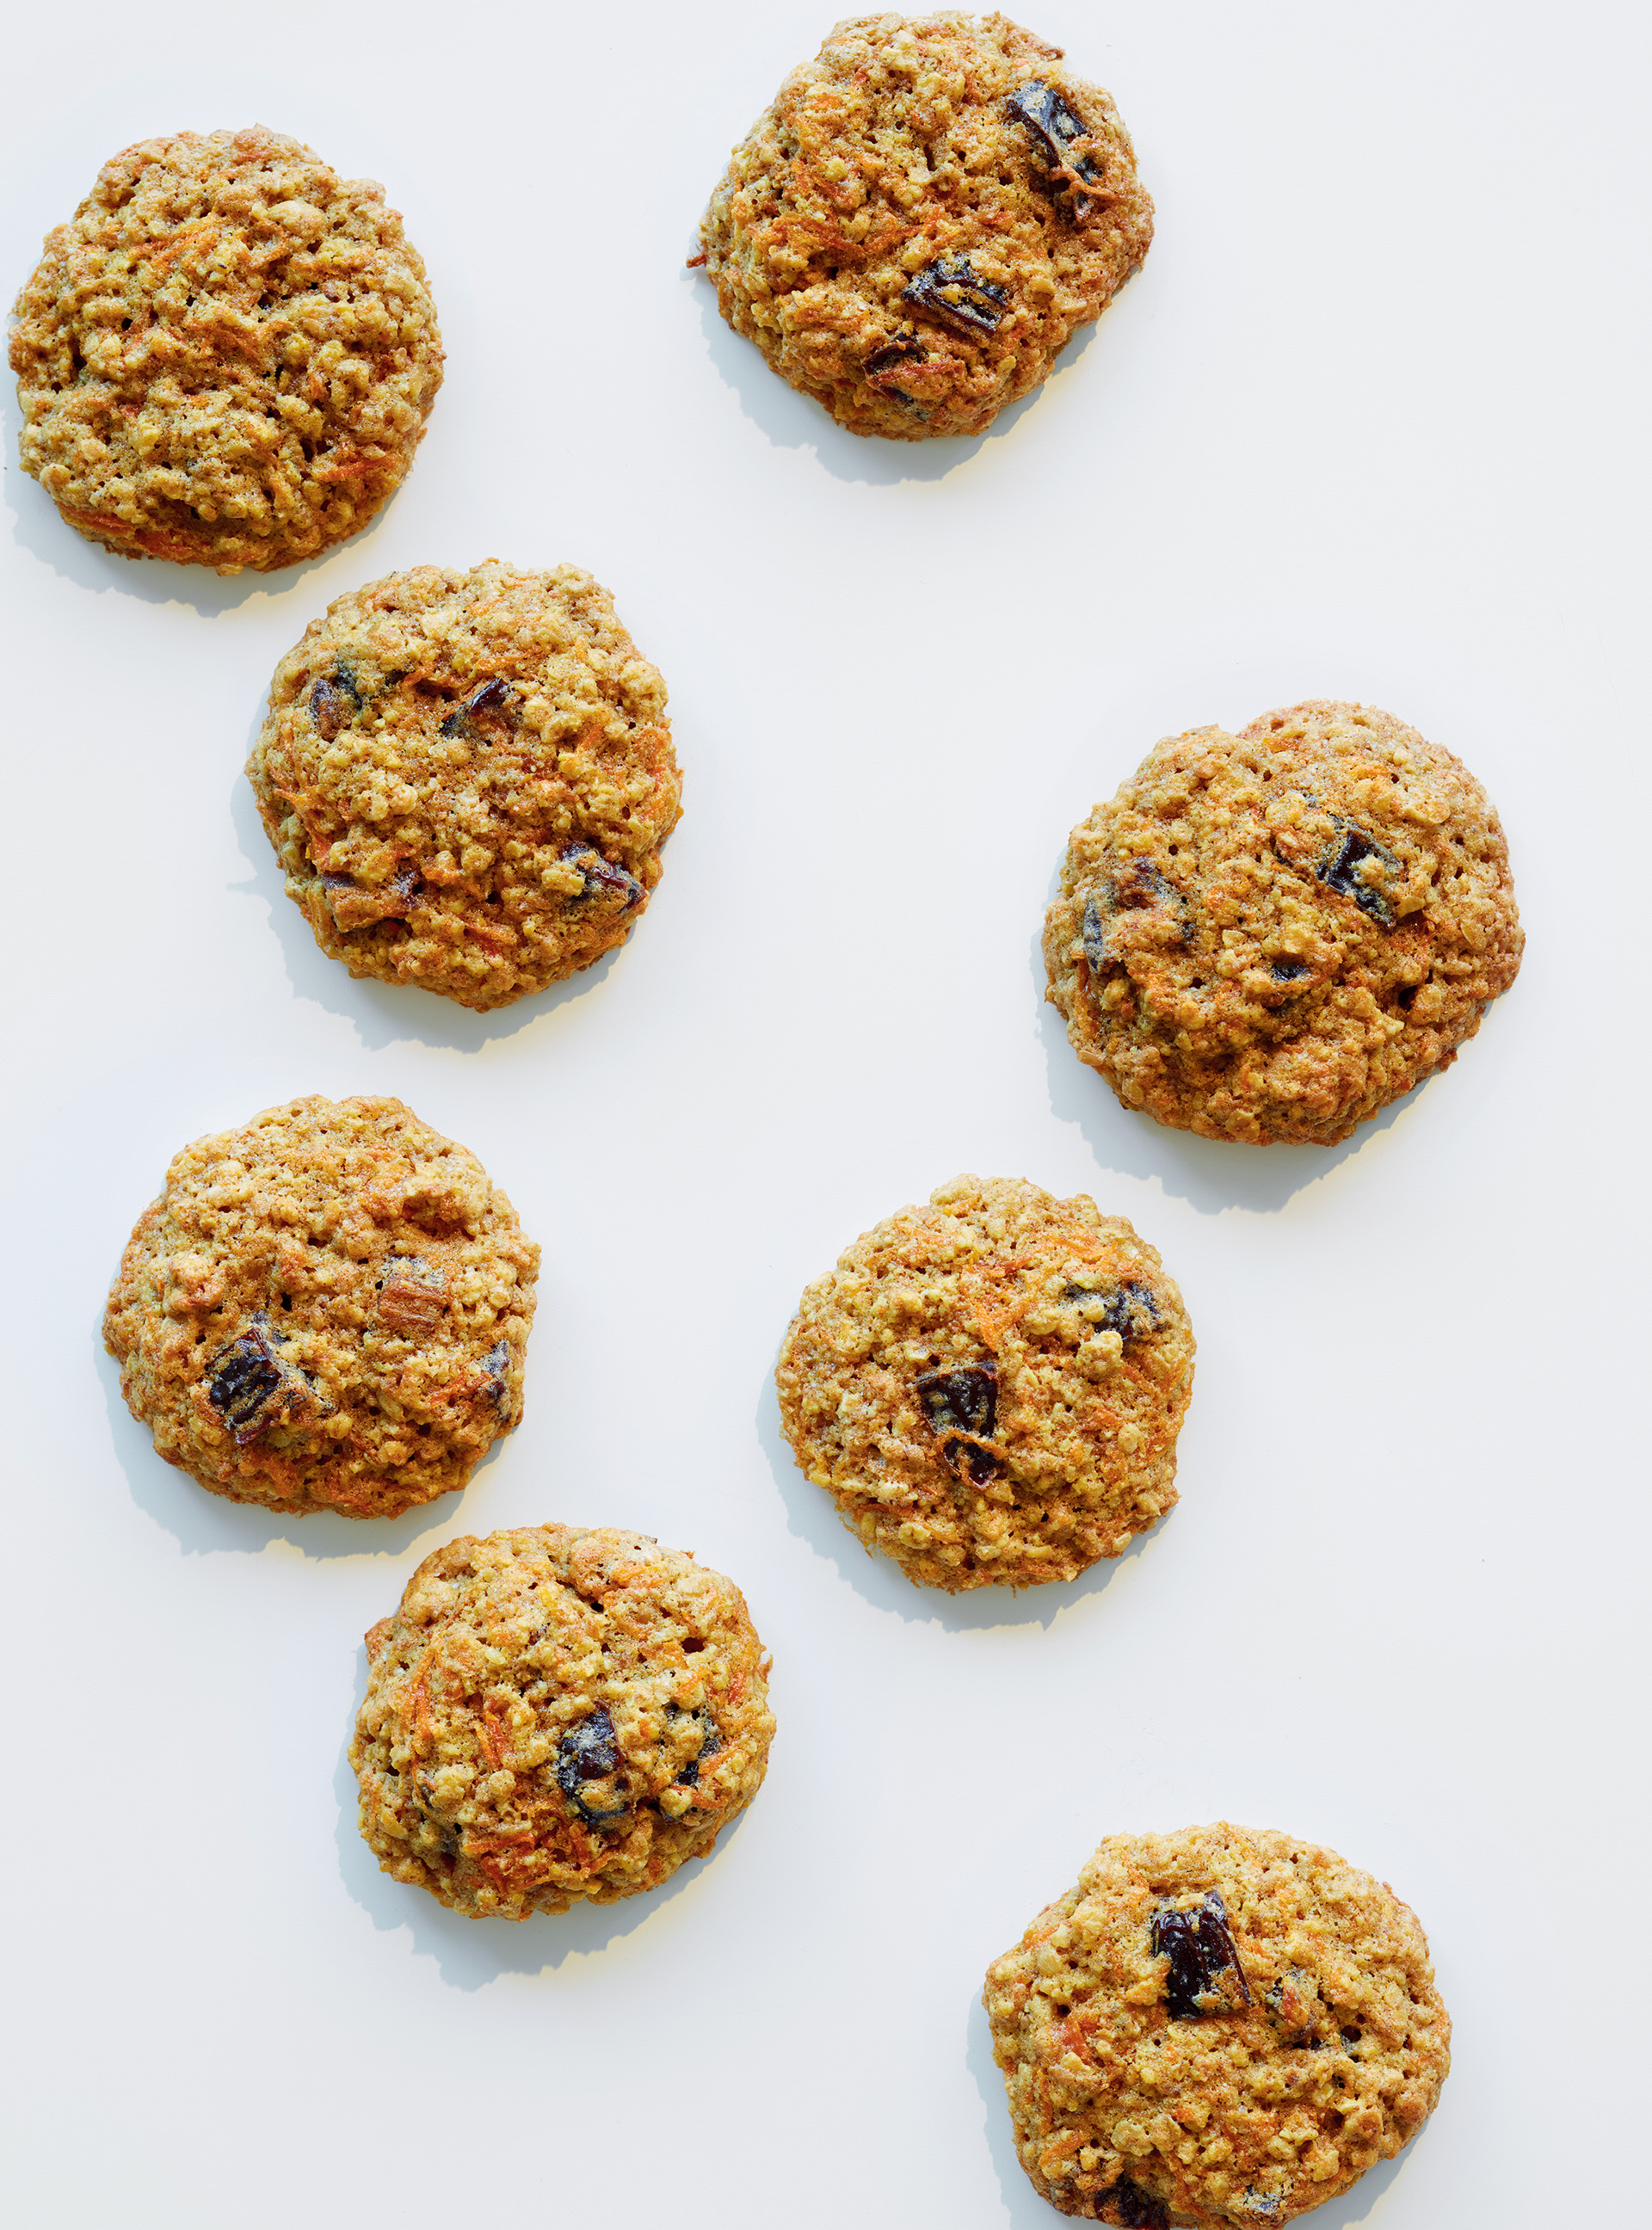 Carrot and Whole Grain Cookies